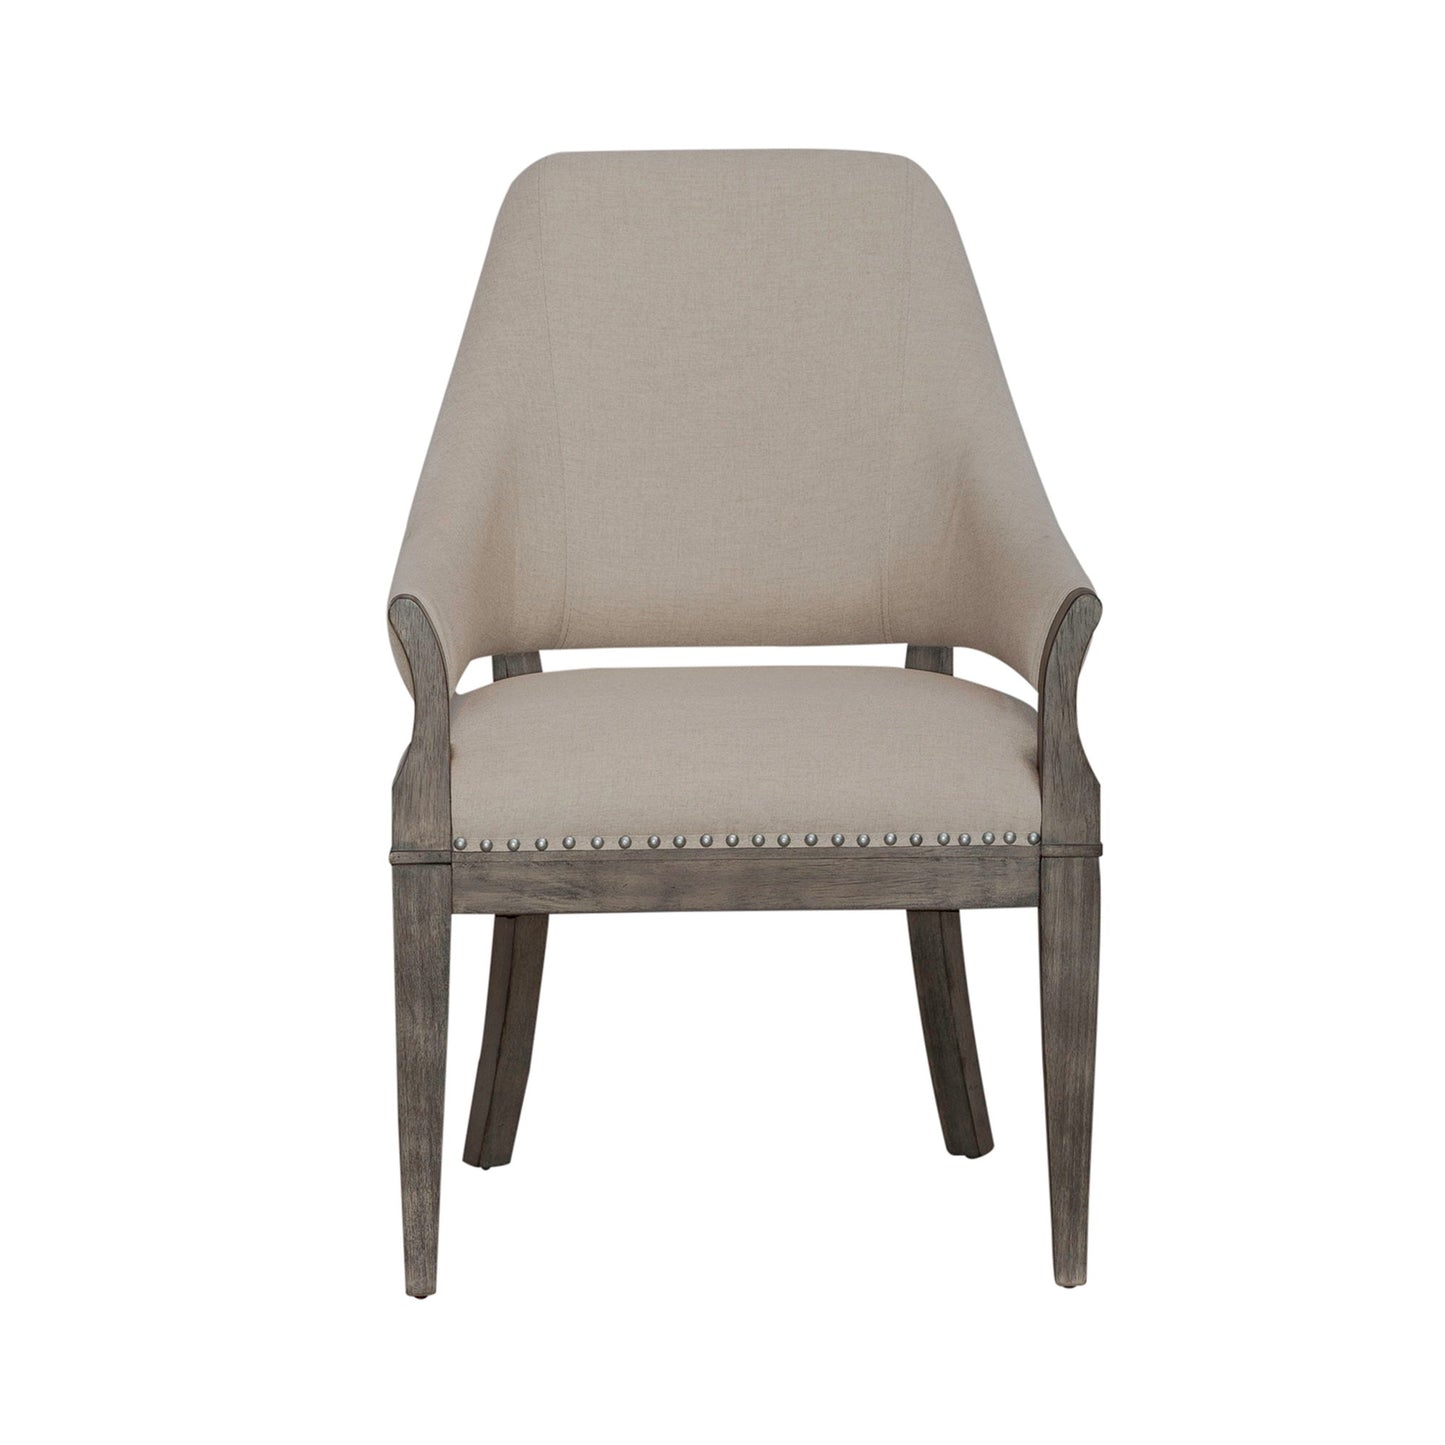 Westfield - Upholstered Arm Chair (Rta)